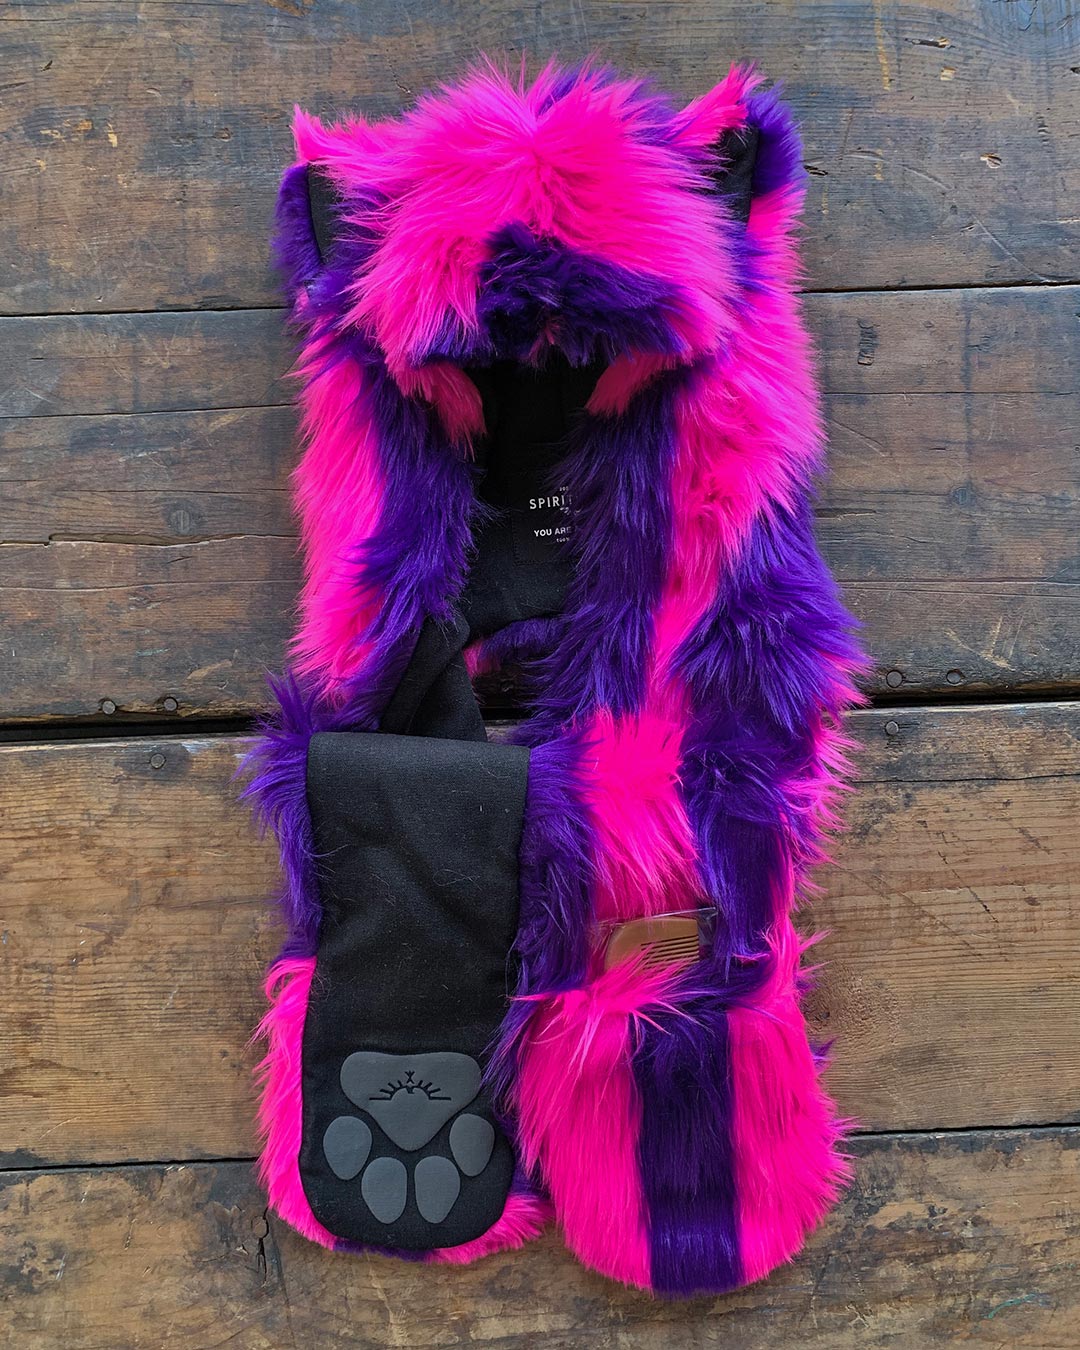 Exterior and Interior View of Unisex Faux Fur Hood with Wonder Cat Design